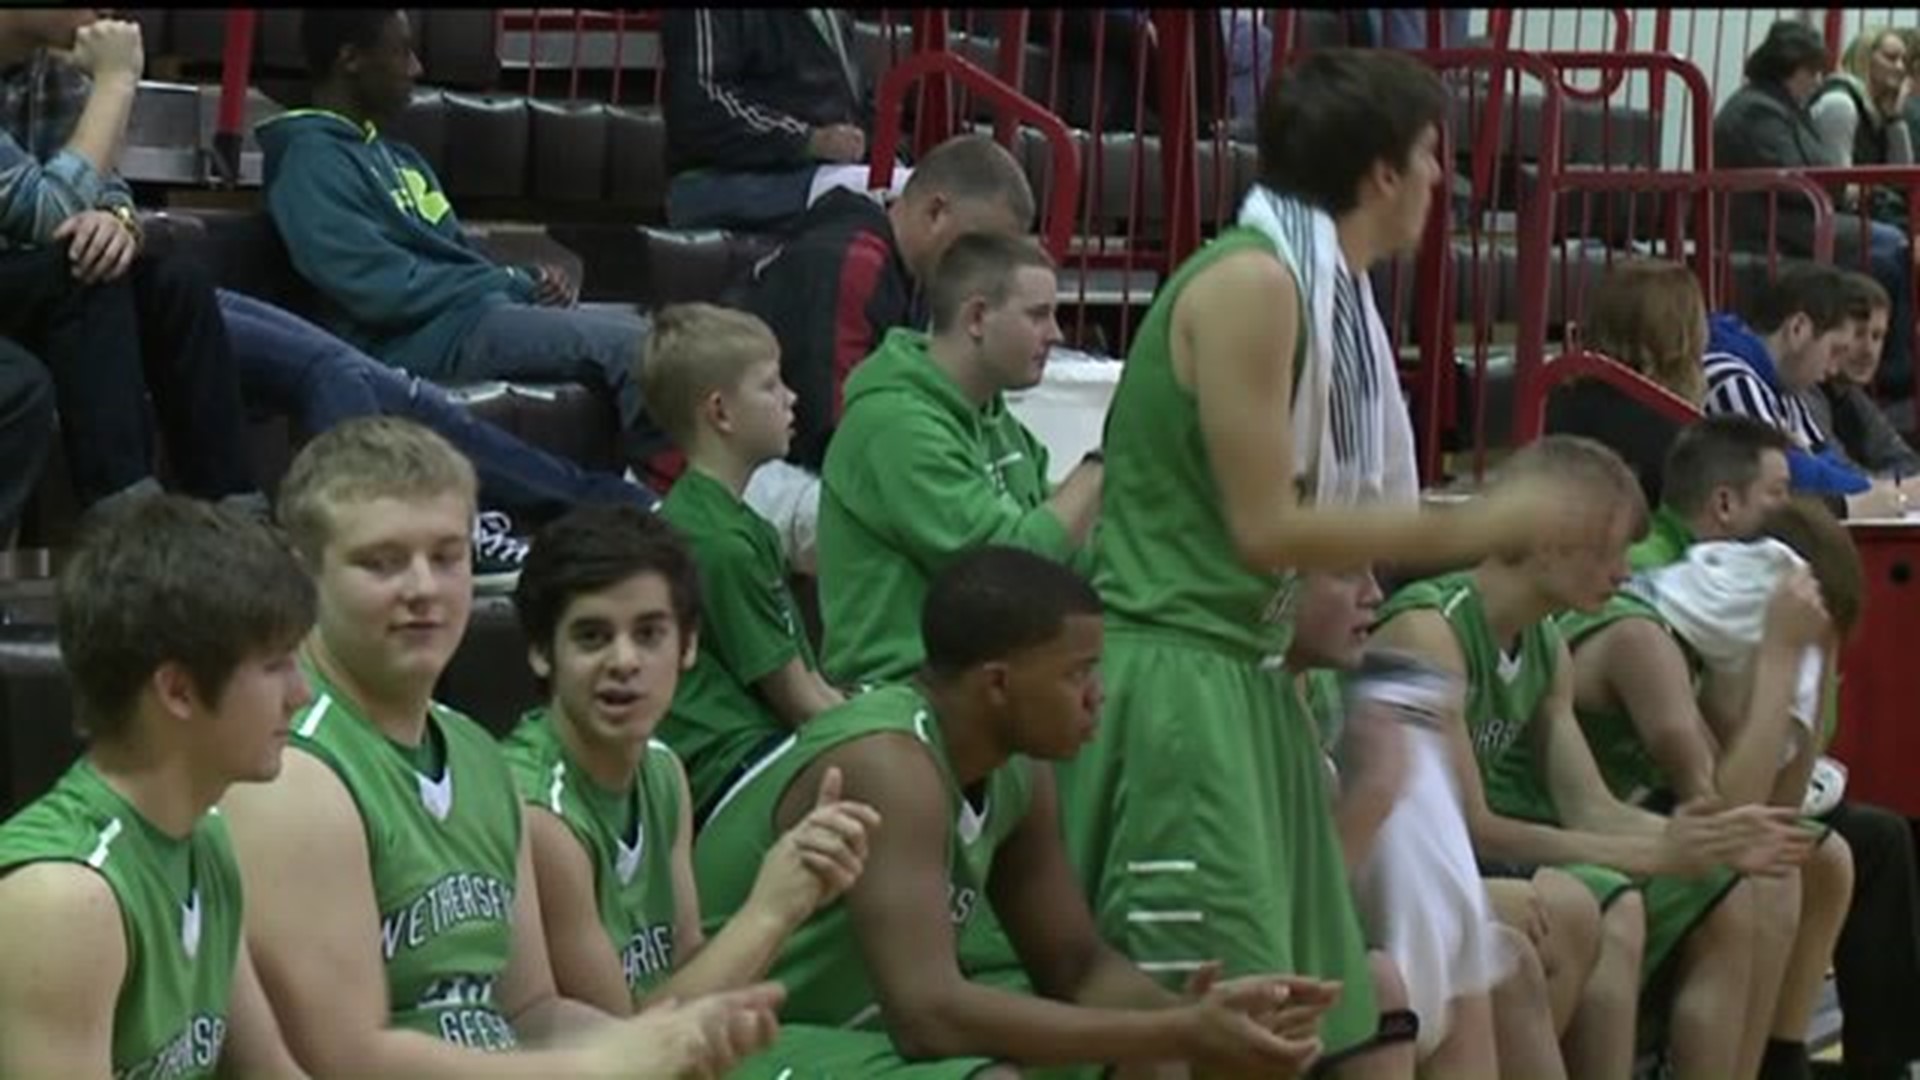 Wethersfield takes care of Knoxville BB